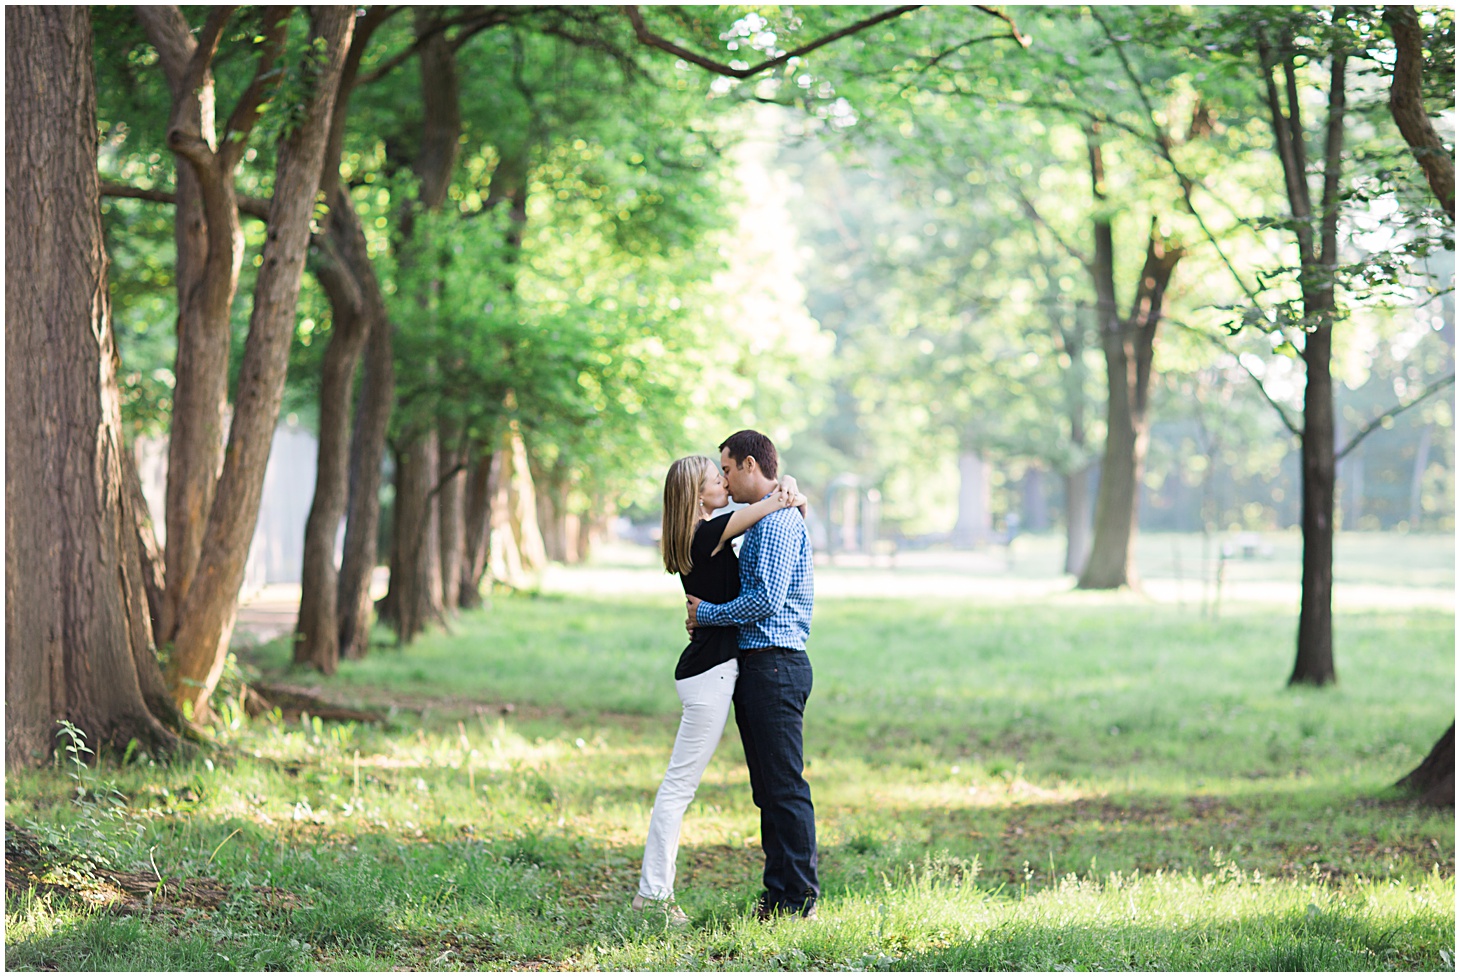 intimate-sunrise-engagement-session-at-the-lincoln-memorial-by-sarah-bradshaw-photography_0015